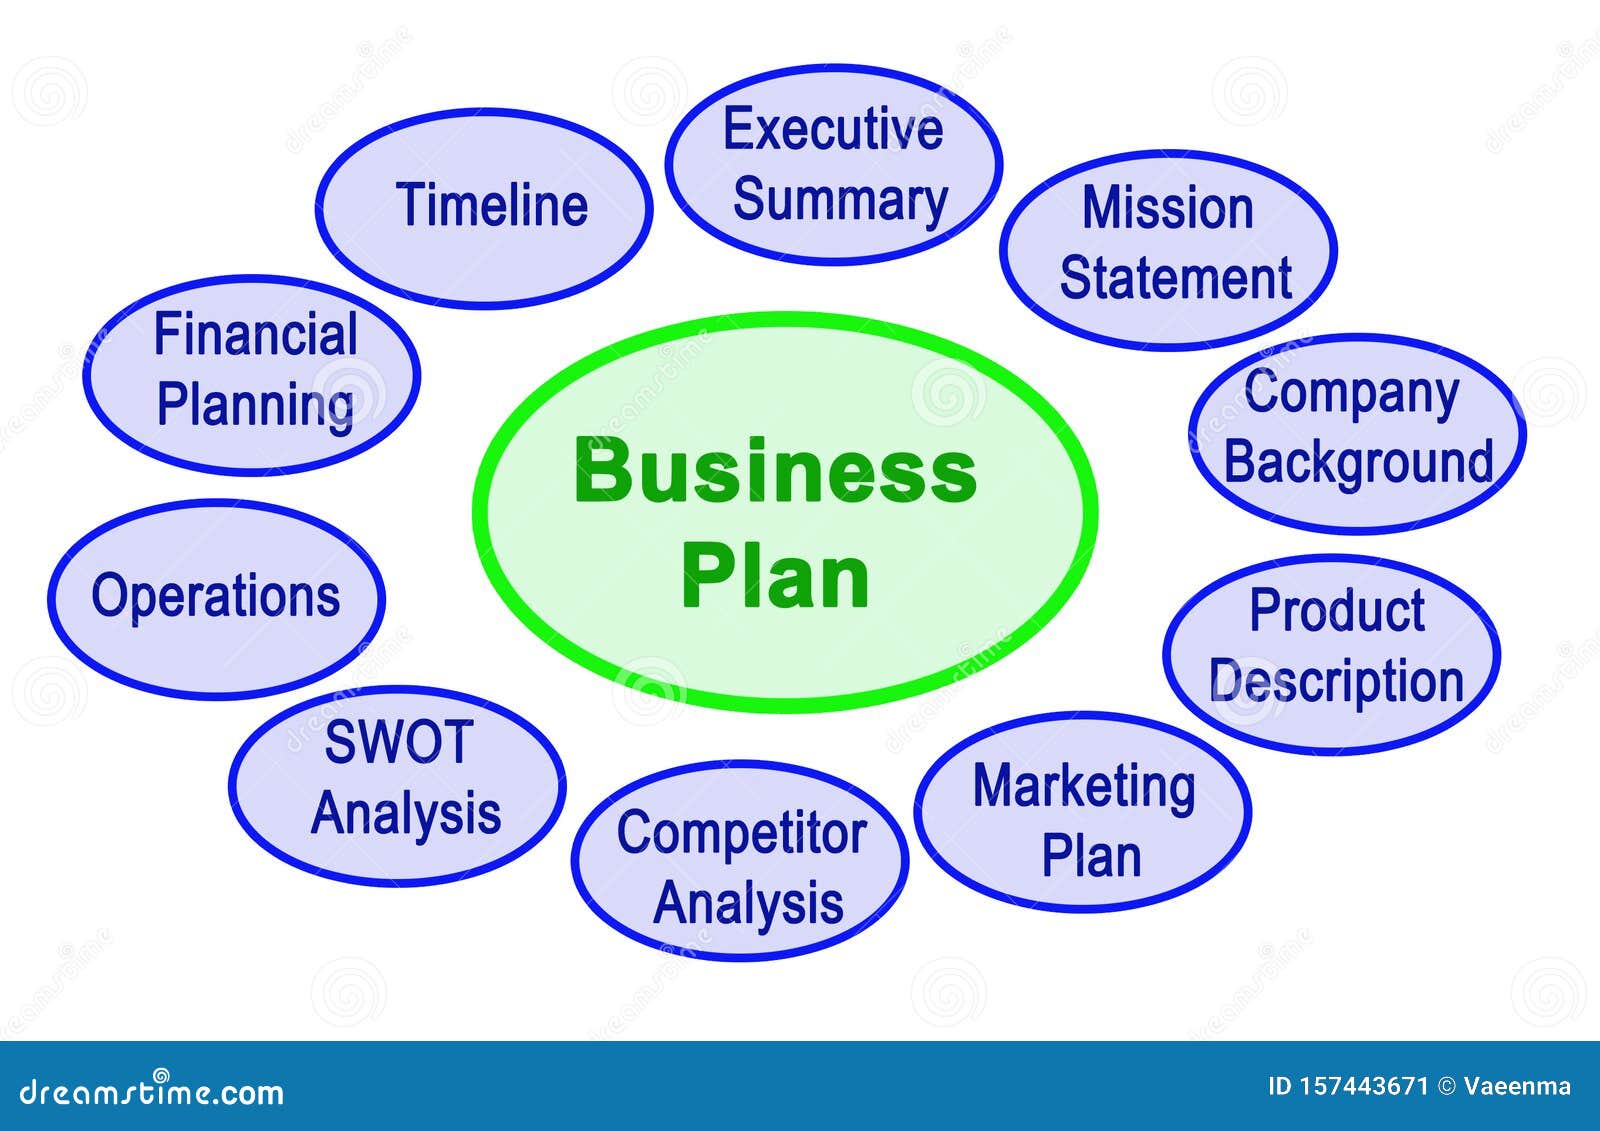 list 8 components of a business plan